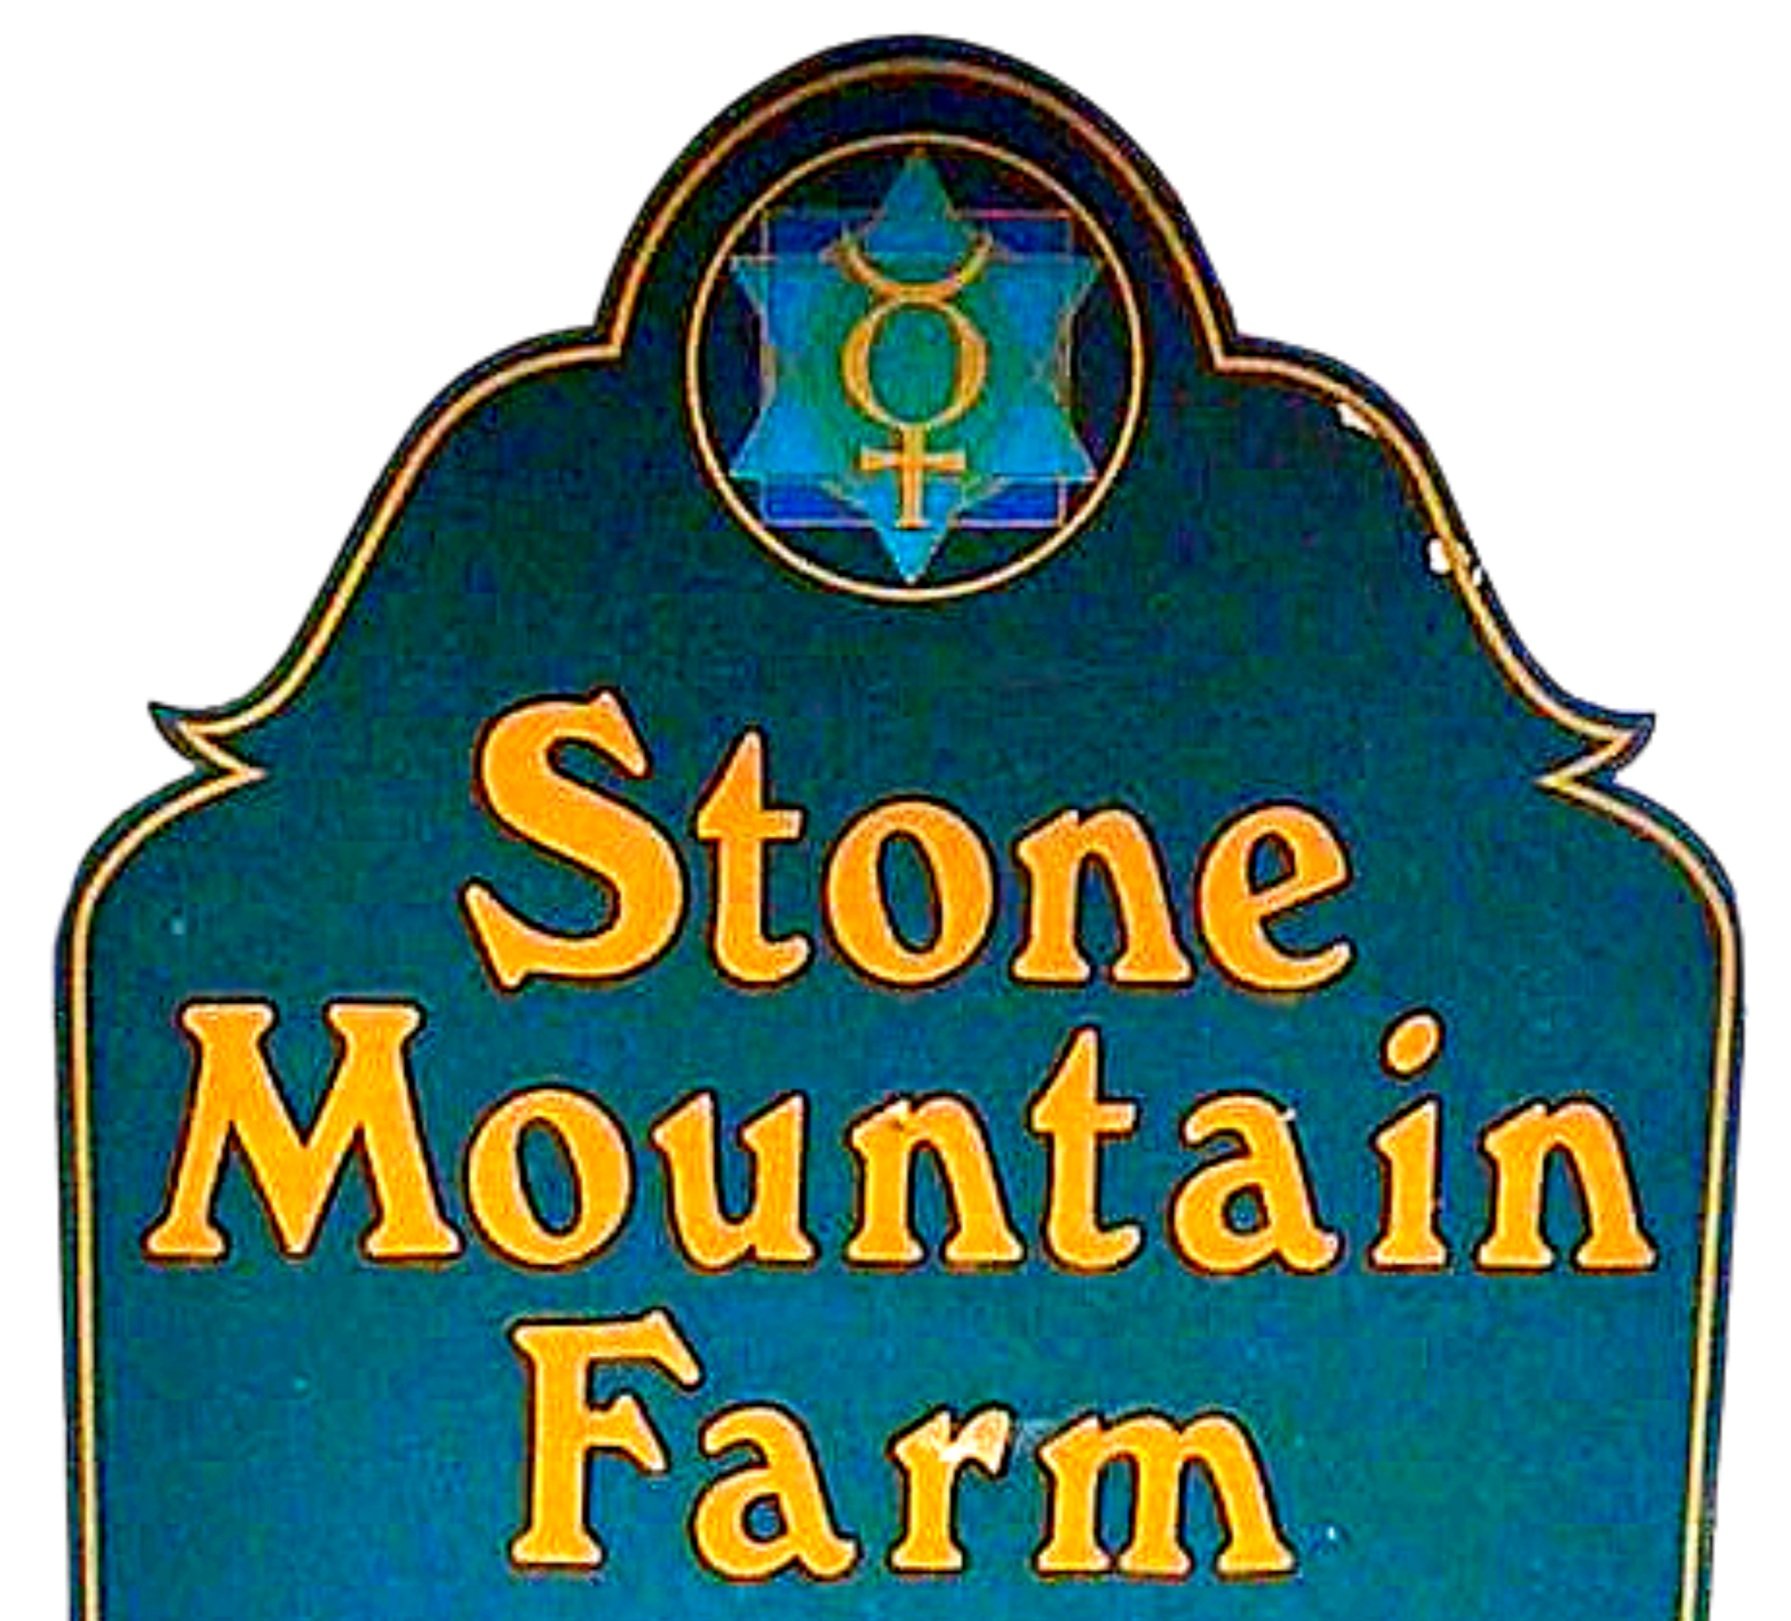  Located in the heart of the Hudson Valley, Stone Mountain farm sits, as farms should, at the end of a long winding road through the woods. The farm is a hub for the performing arts, an intentional community, and puts the land first.  